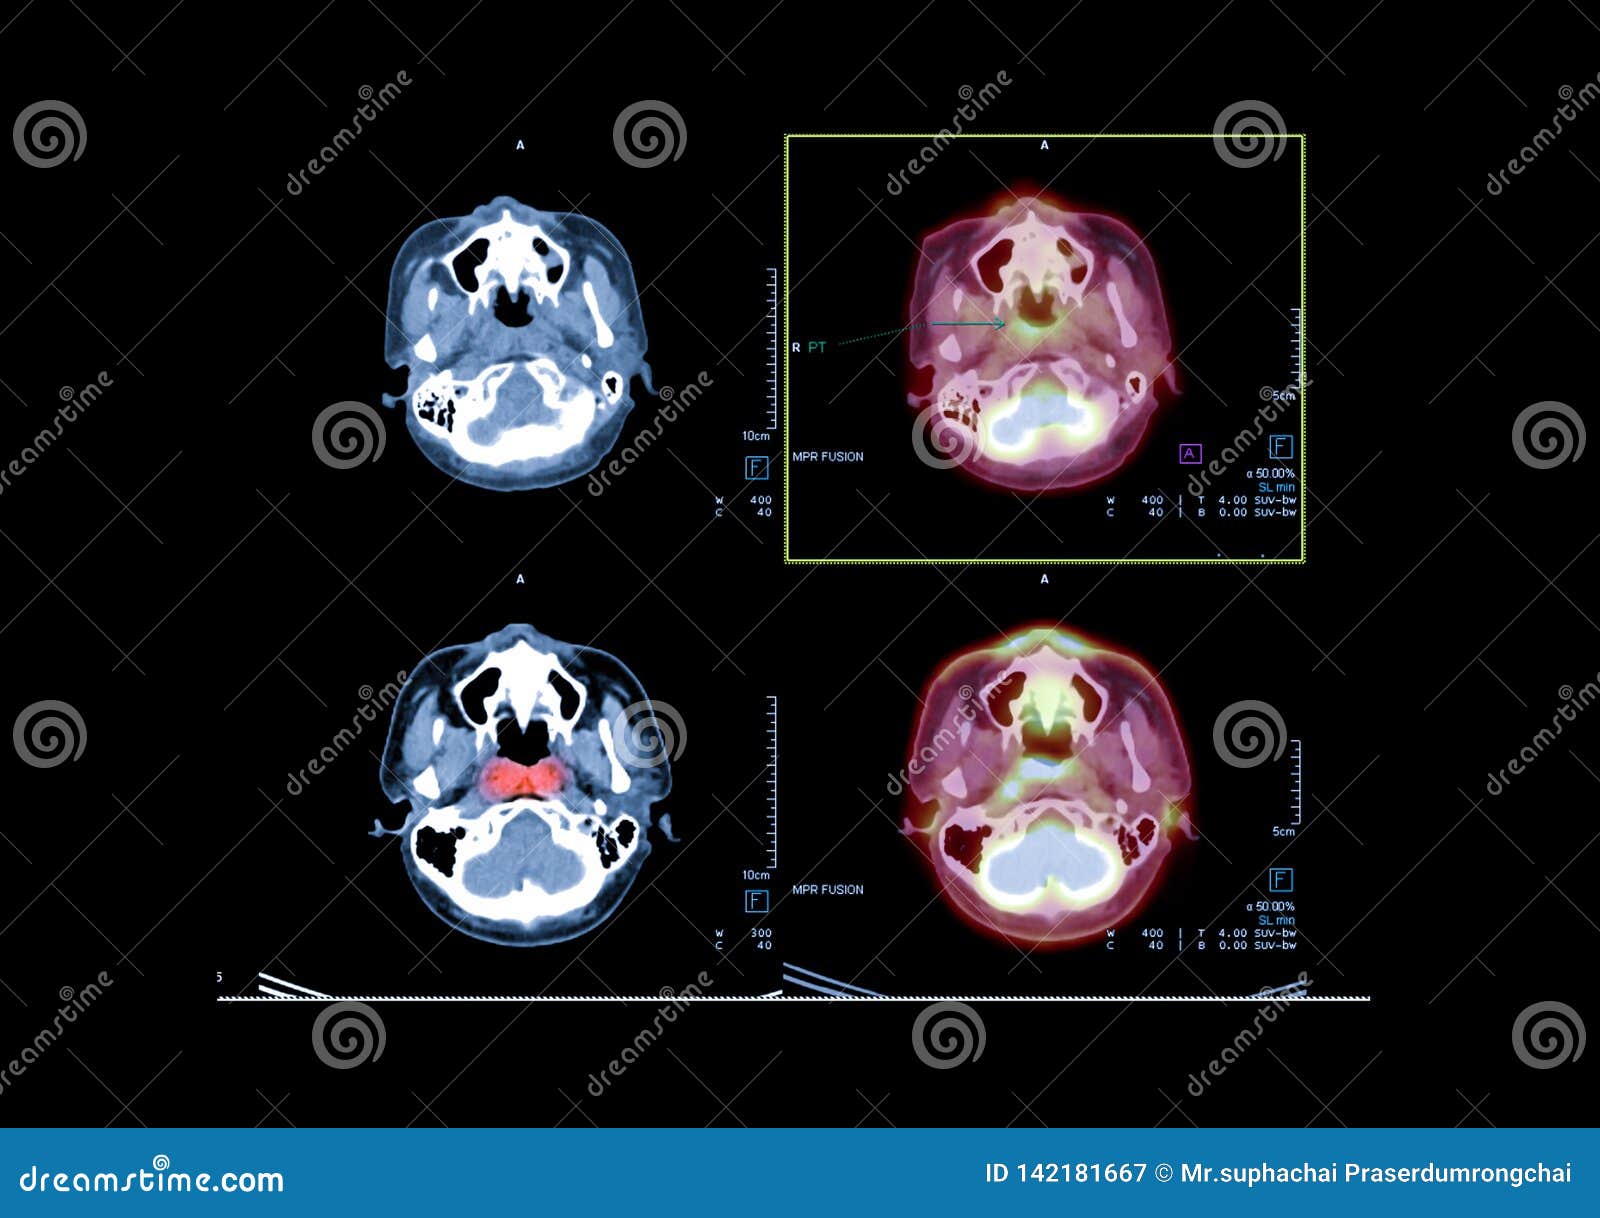 pet ct image of the brain showing ca nasopharynx.